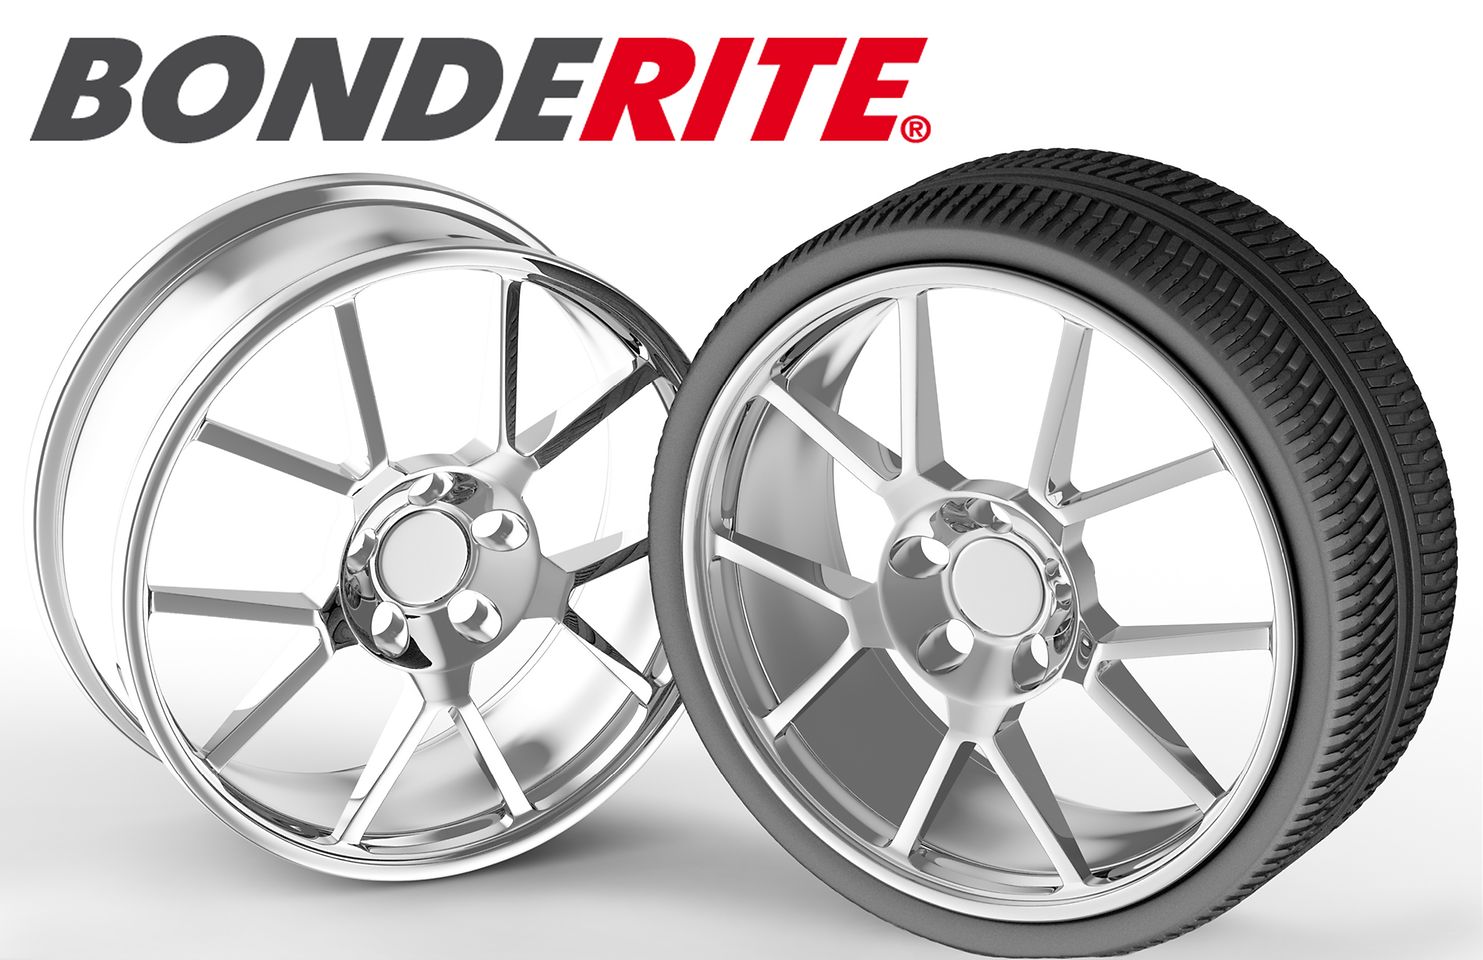 

Innovations Q2/2016: Our products for the pretreatment of light metals like aluminium in the automotive industry optimize both processes and performance. The innovative coating solution Bonderite M-NT 4595 provides outstanding adhesive properties and corrosion protection for wheels.